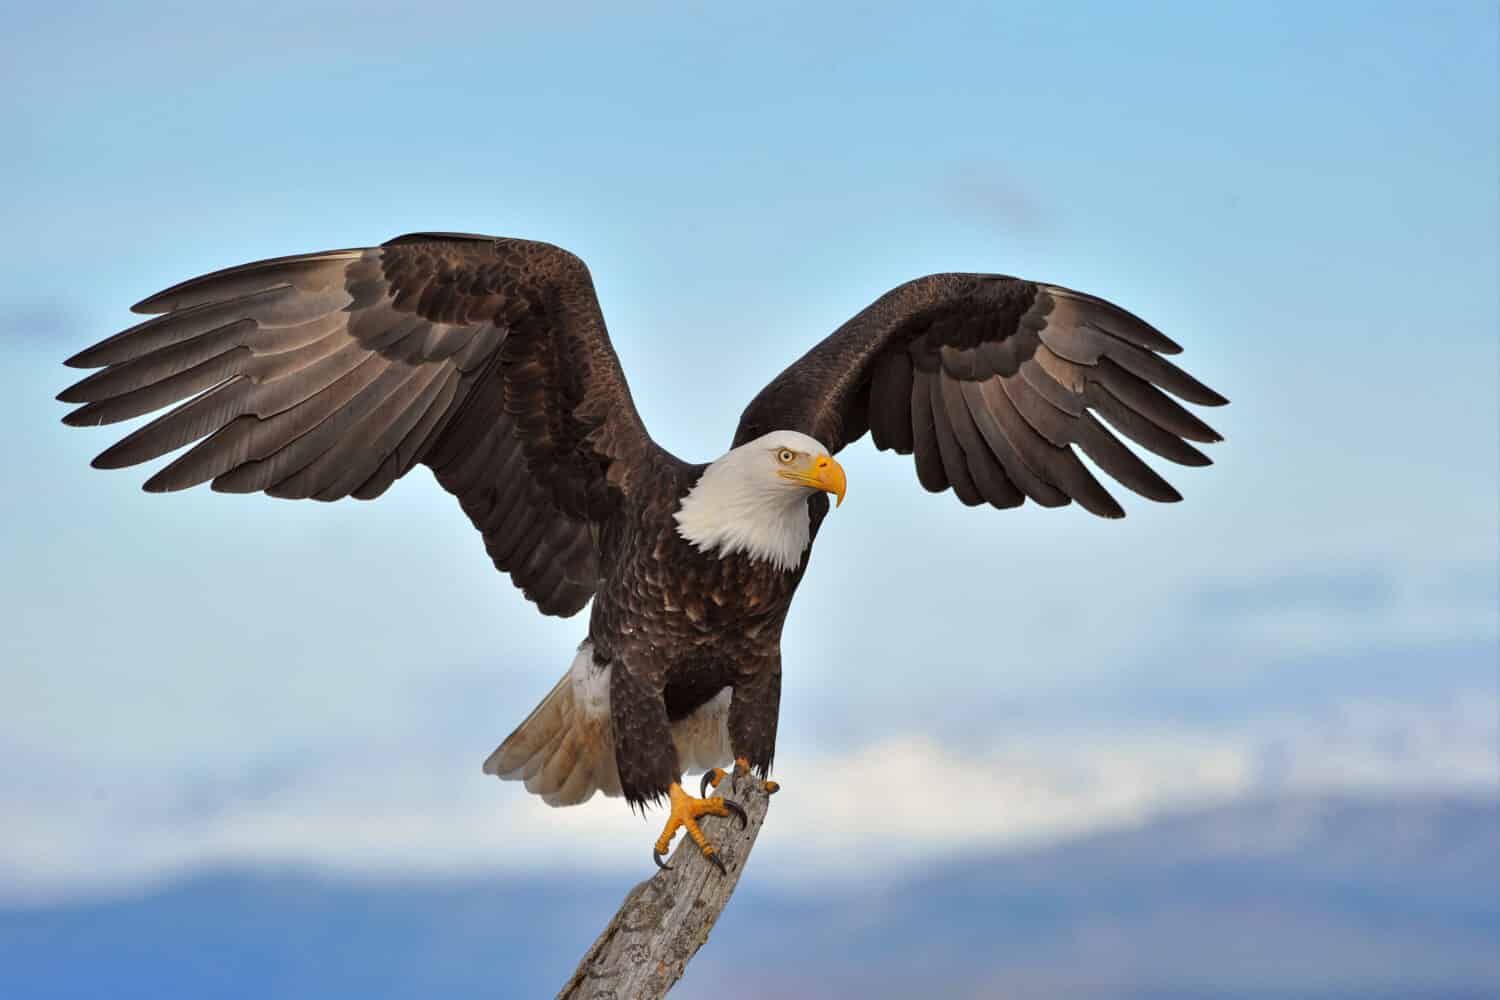 Idaho's Aerial Sentinel: Embracing the Iconic Majesty of a Bald Eagle Surveying its Pristine Mountain Domain.